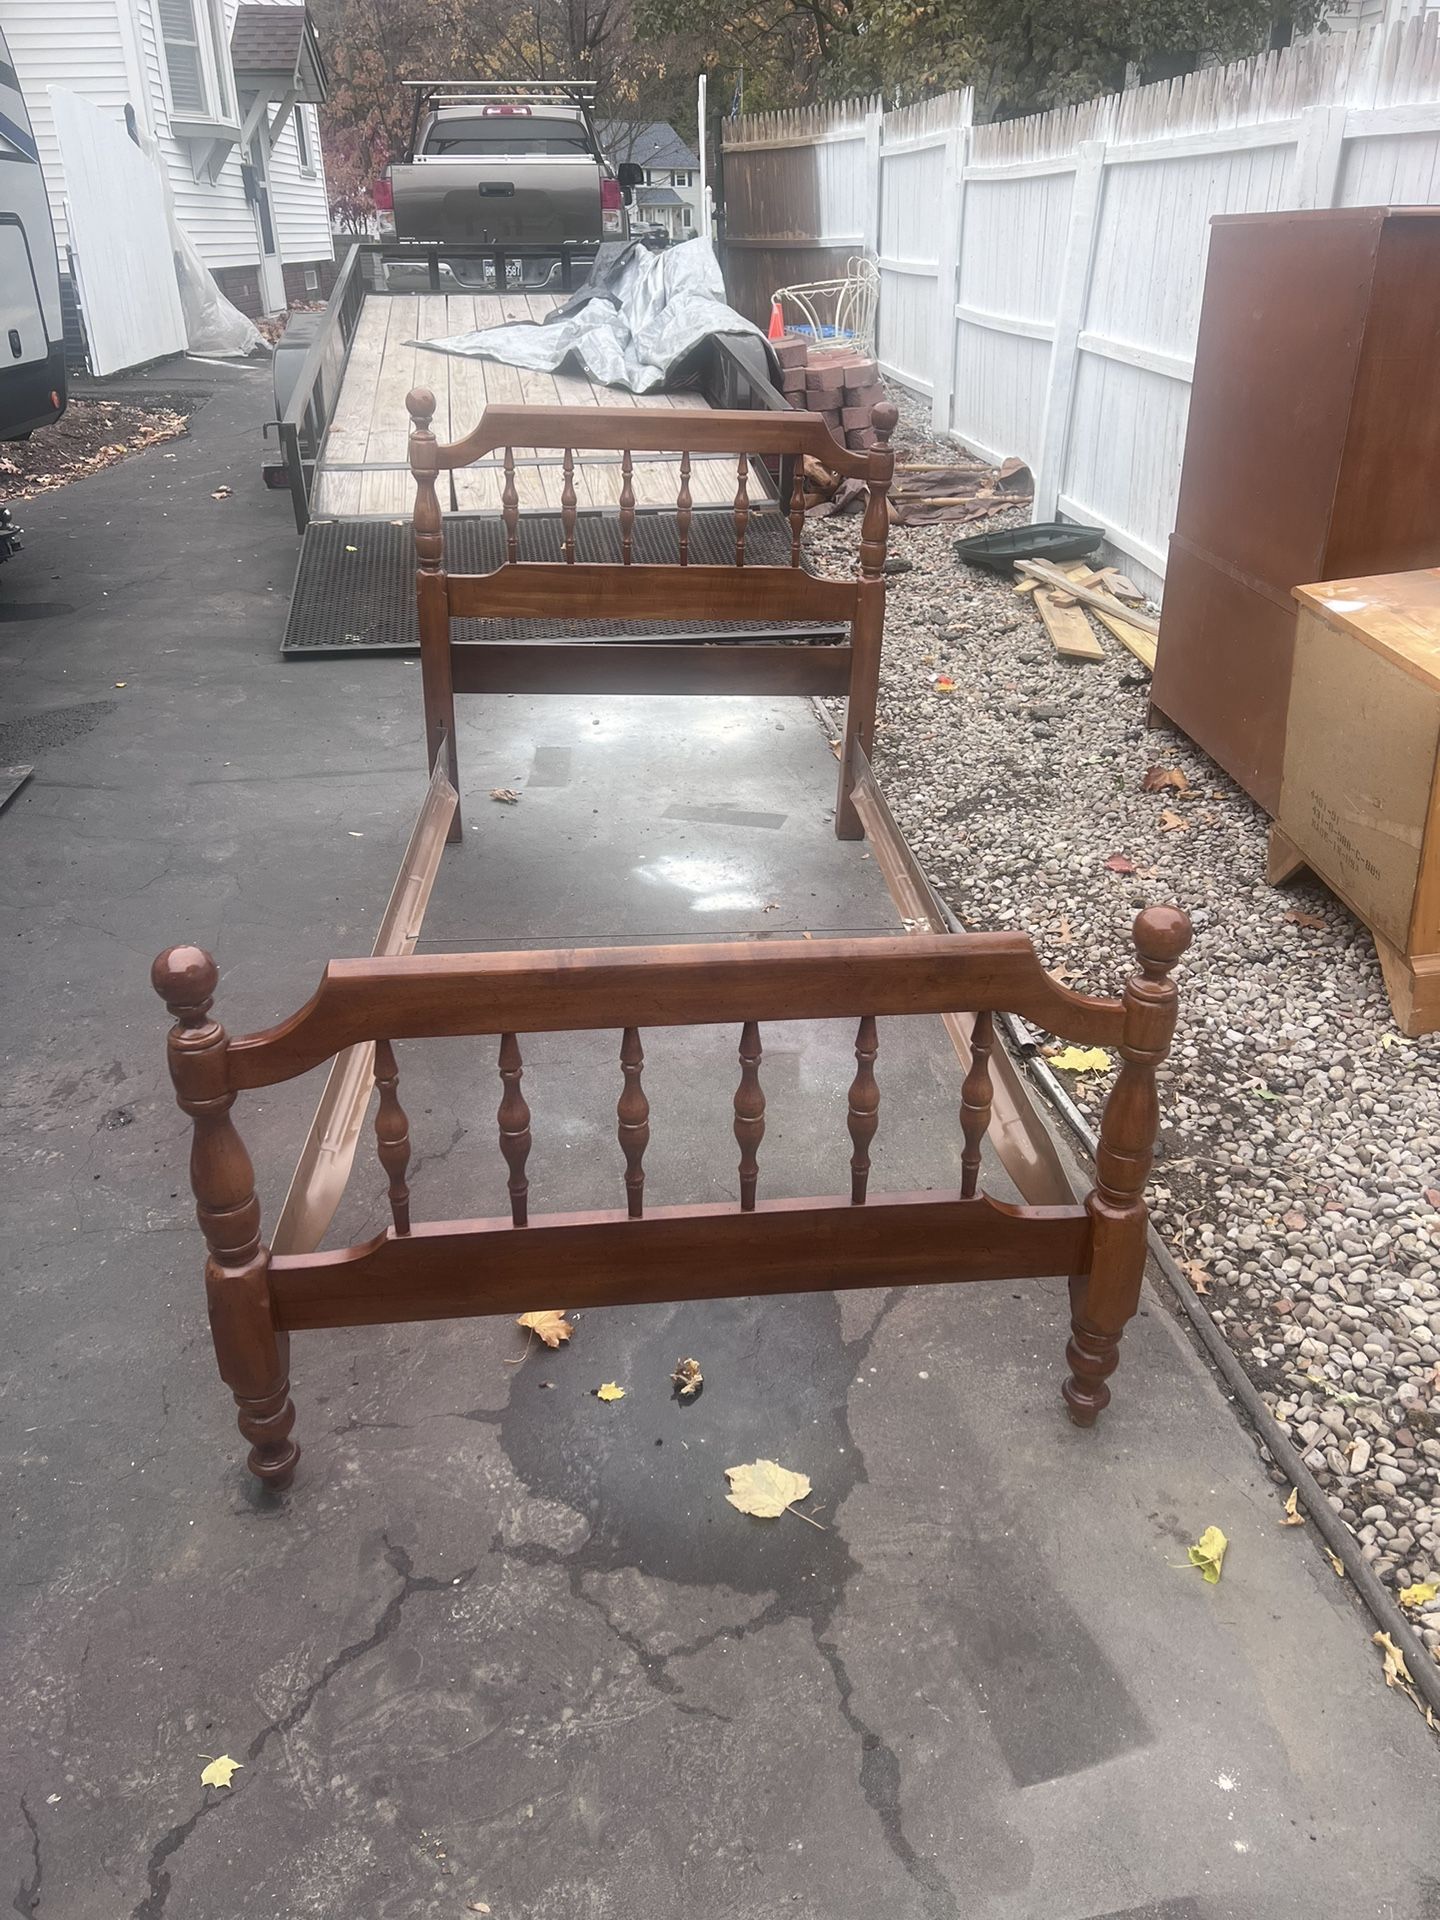 !!Reduced $100 firm Very nice American Drew solid wood twin bed frame. It’s in like new shape. If